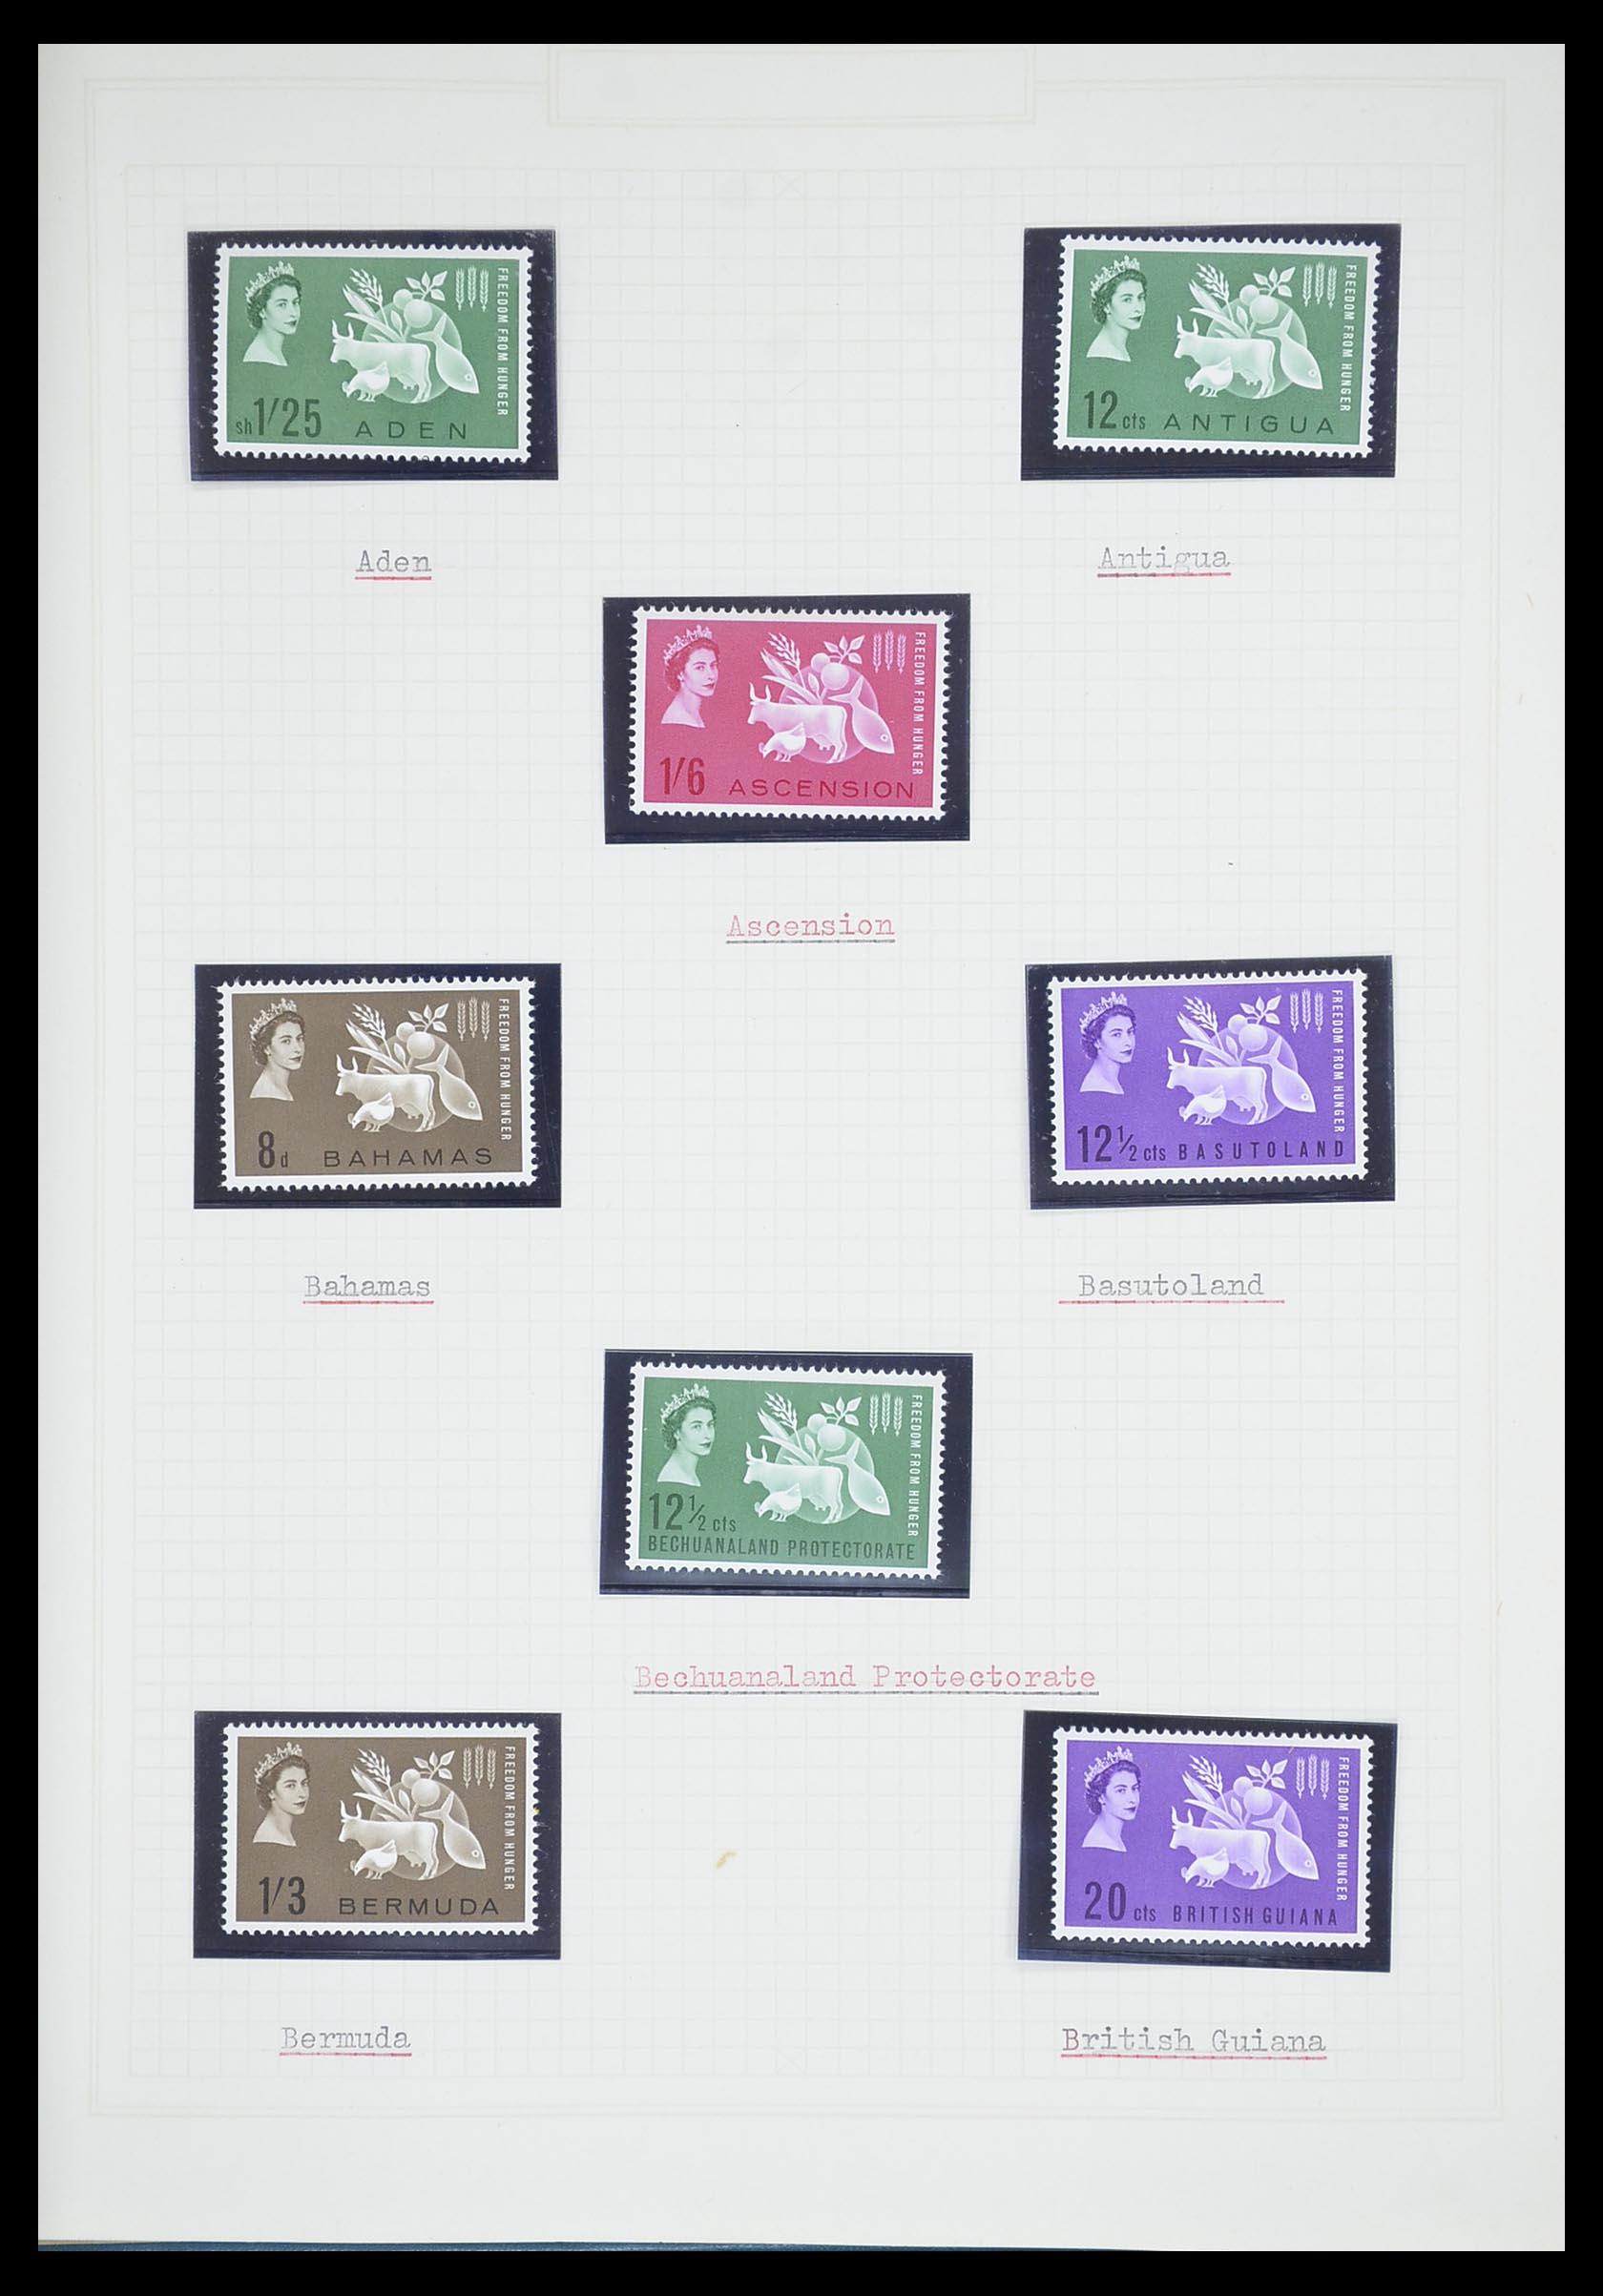 33747 429 - Stamp collection 33747 Various thematics 1958-1986.